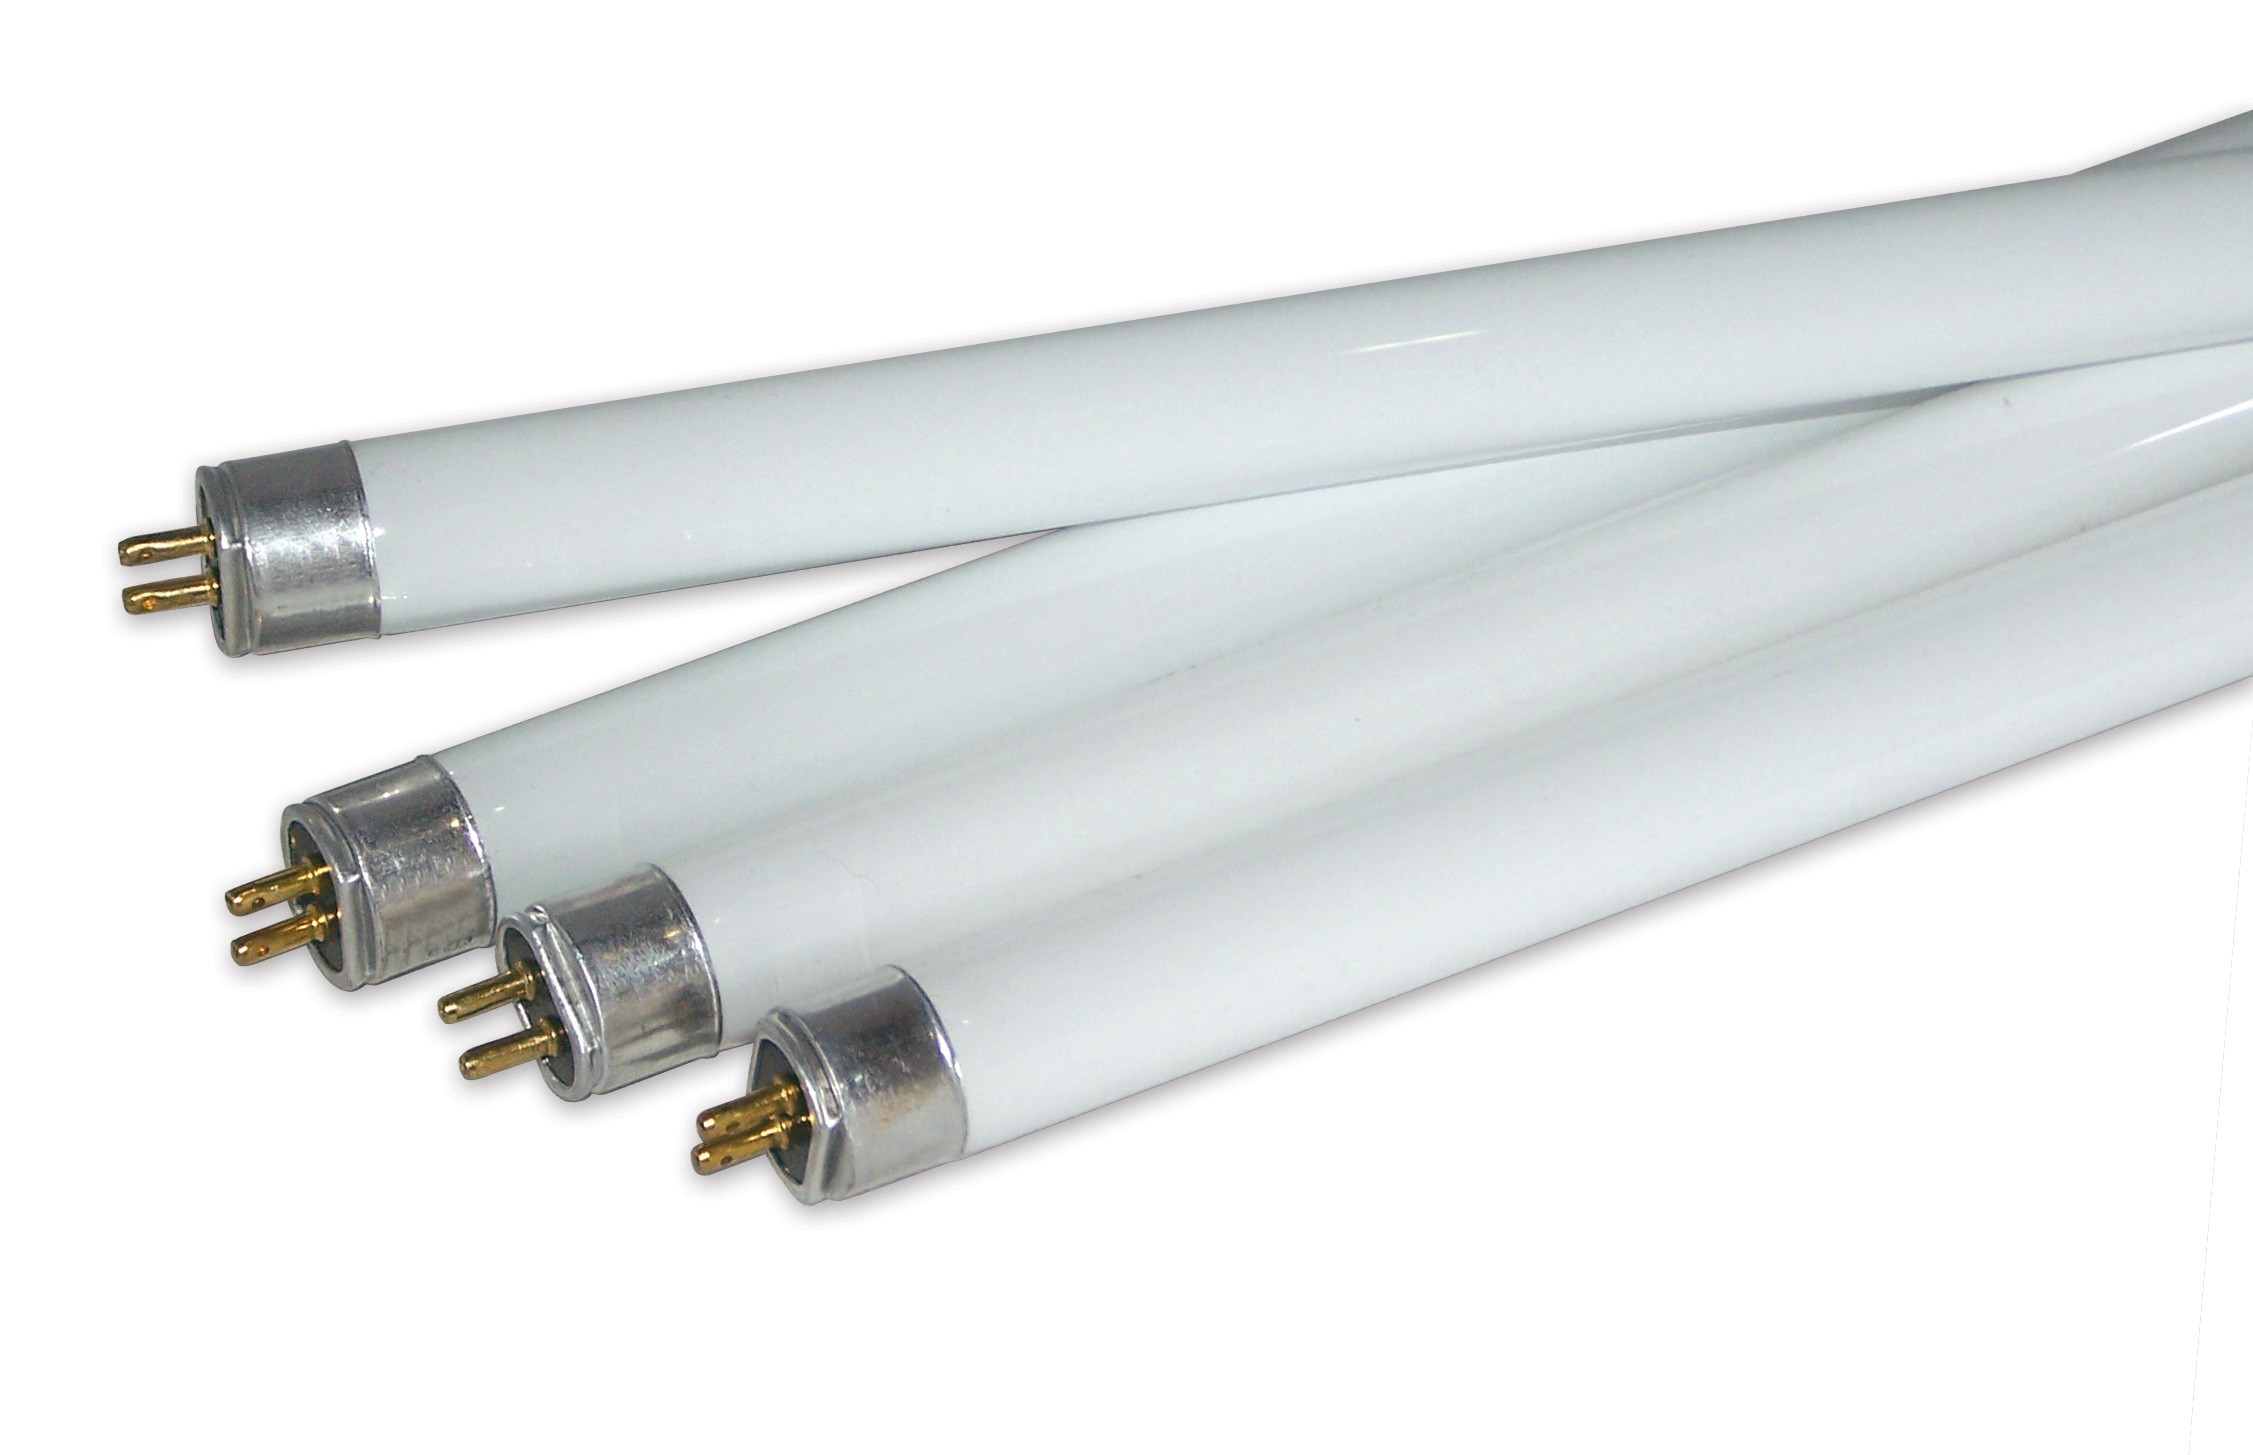 Eiko F54 Ho T5 4 Feet Replacement Bulb Review T5 Grow Light Fixtures with regard to dimensions 2253 X 1455